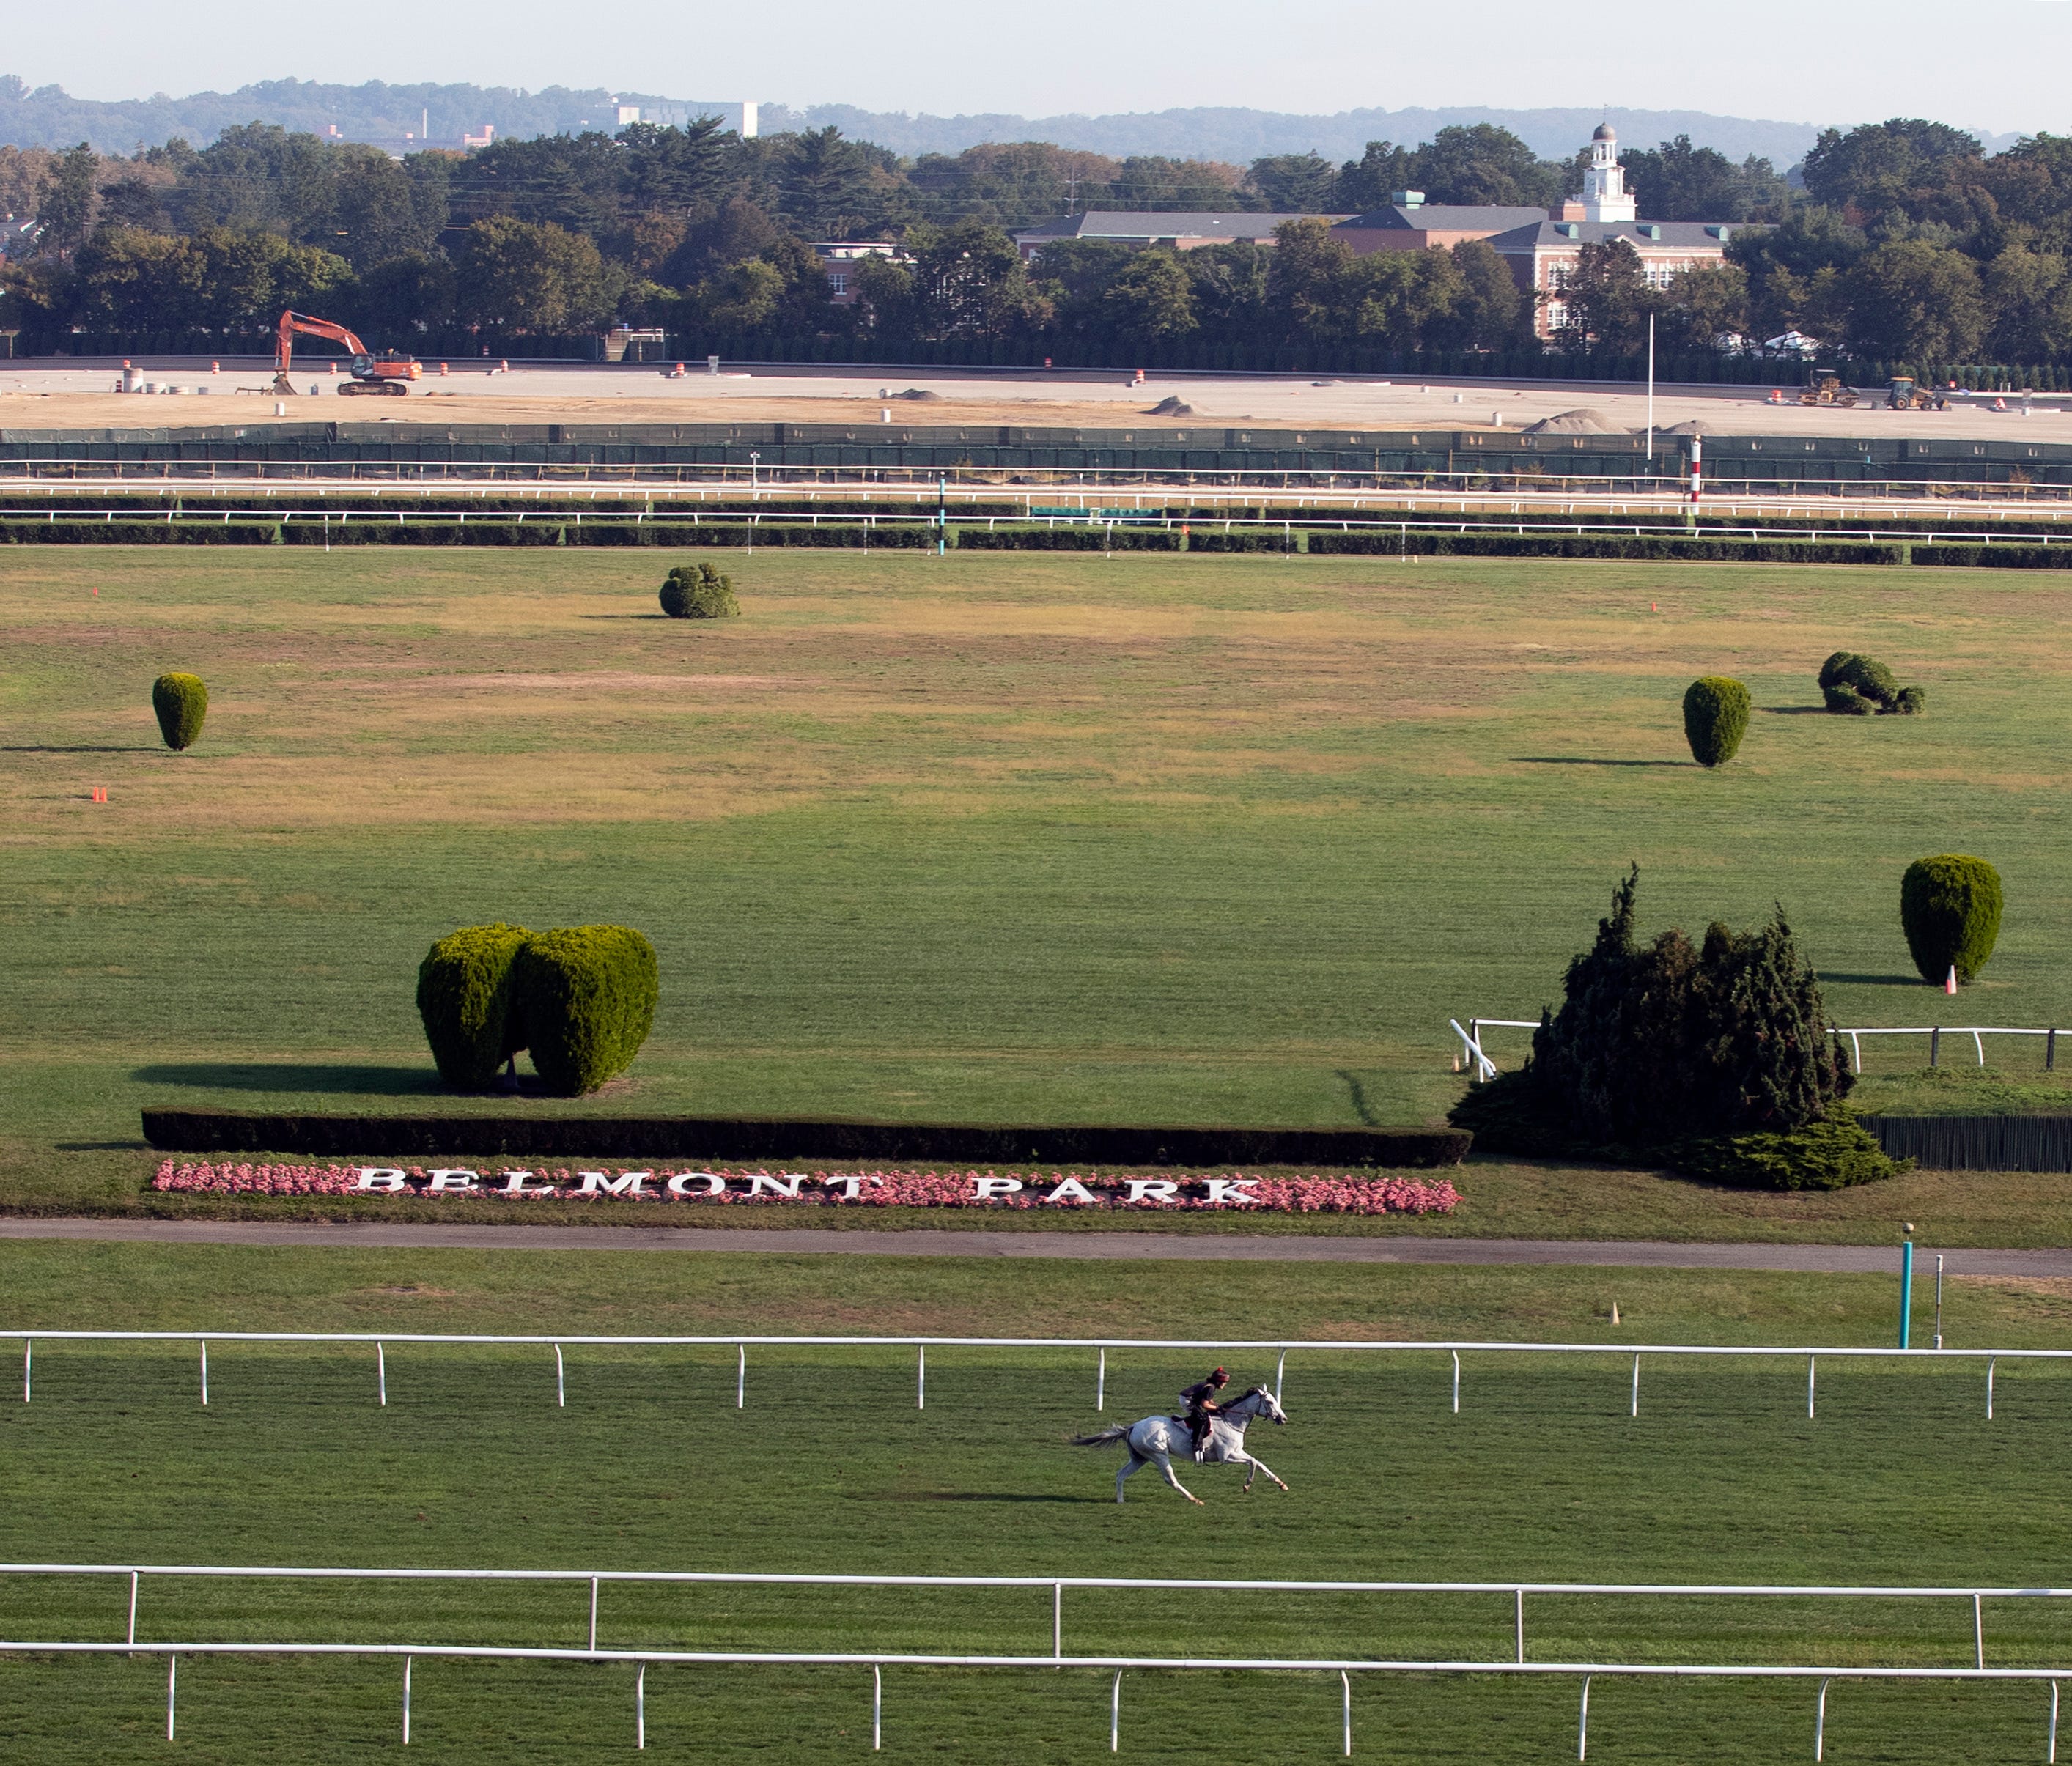 Belmont fall meet moved to Aqueduct as renovations begin